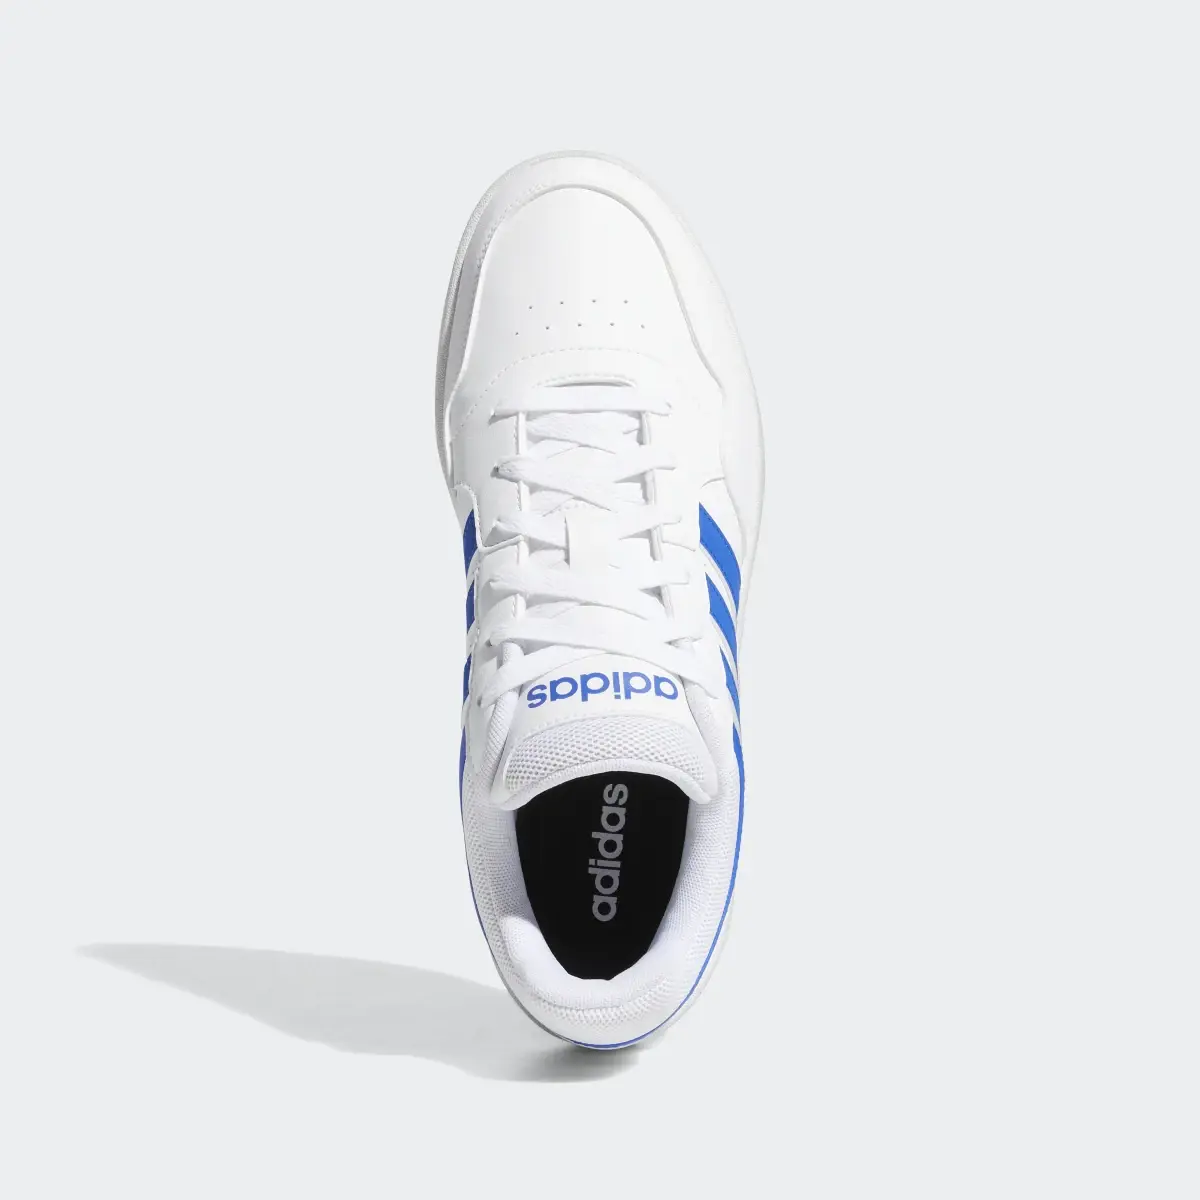 Adidas Hoops 3.0 Low Classic Vintage Shoes. 3